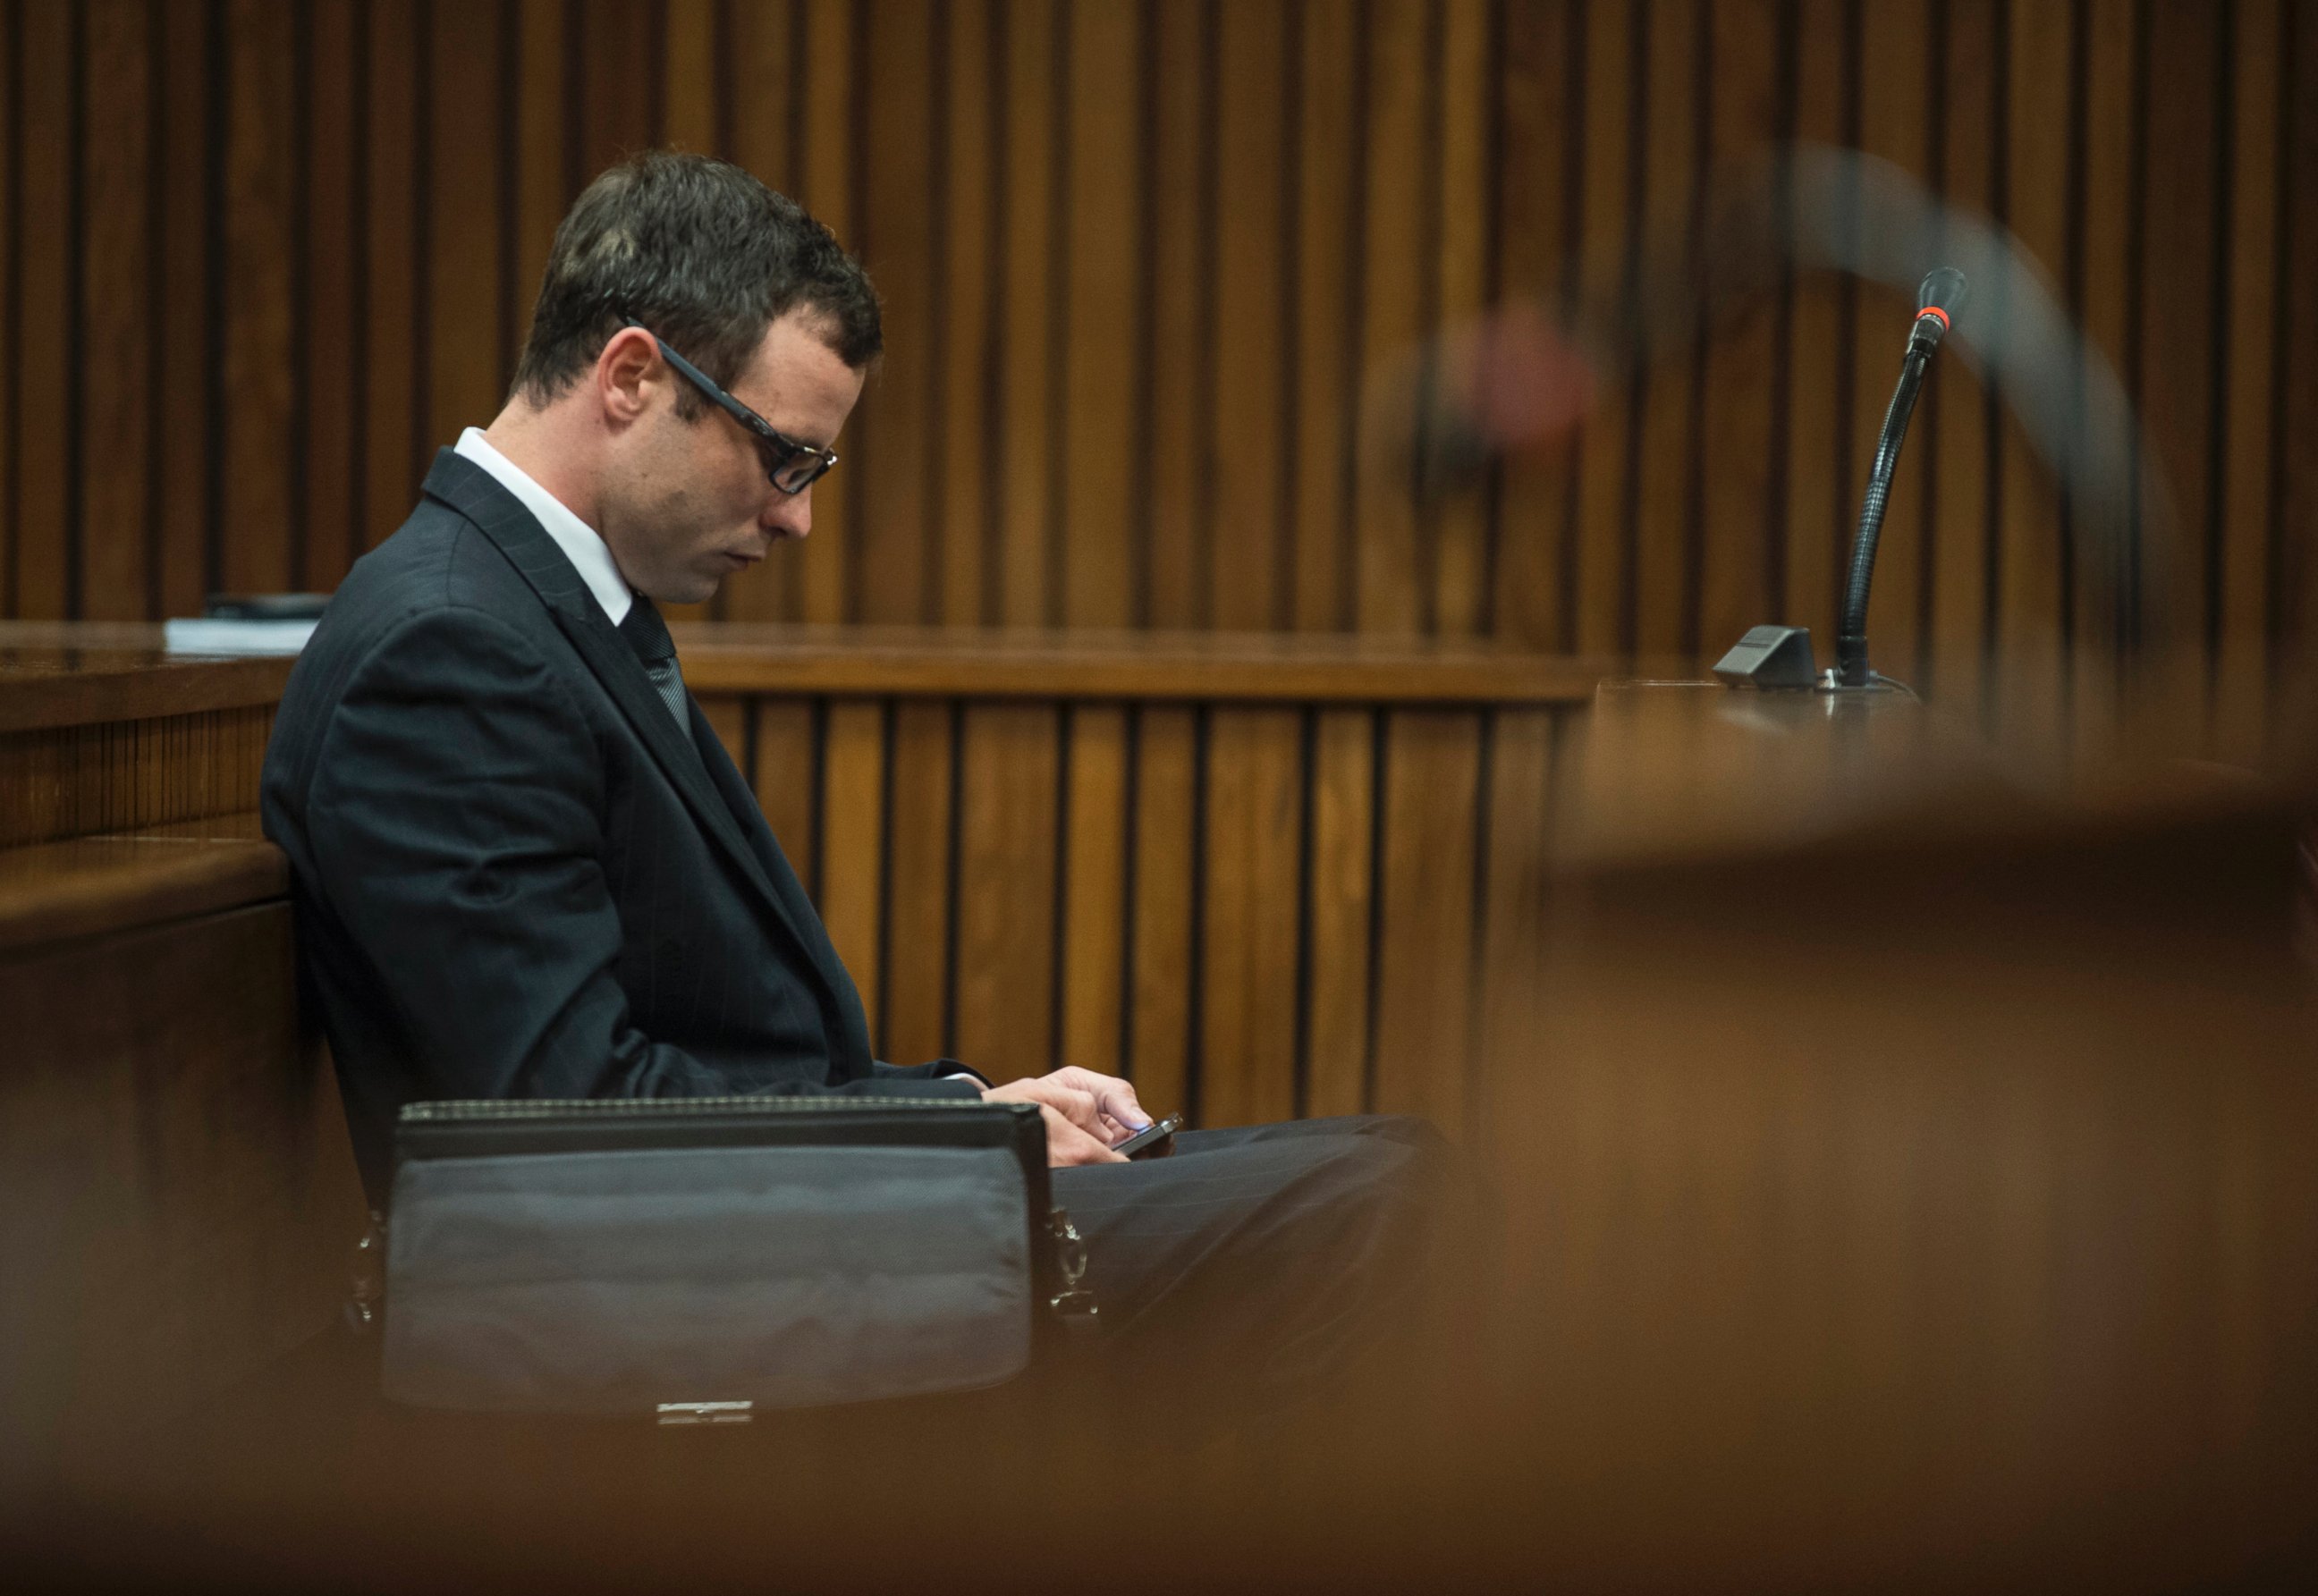 Oscar Pistorius appears in a courtroom at his murder trial in Pretoria, South Africa, Thursday, Aug. 7 2014.